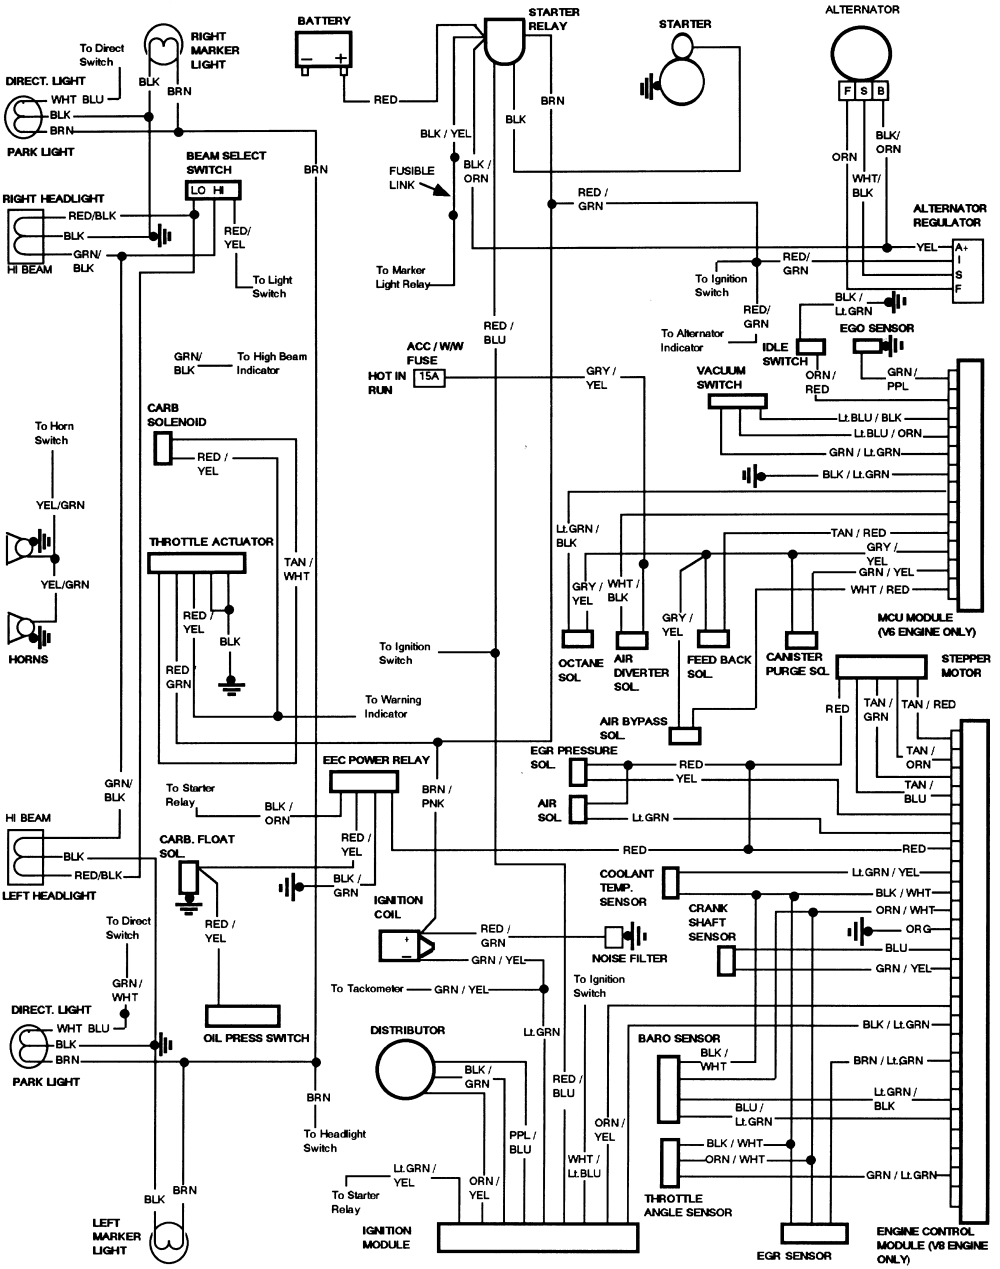 1997 Ford F150 Starter Wiring Diagram from econtent.autozone.com